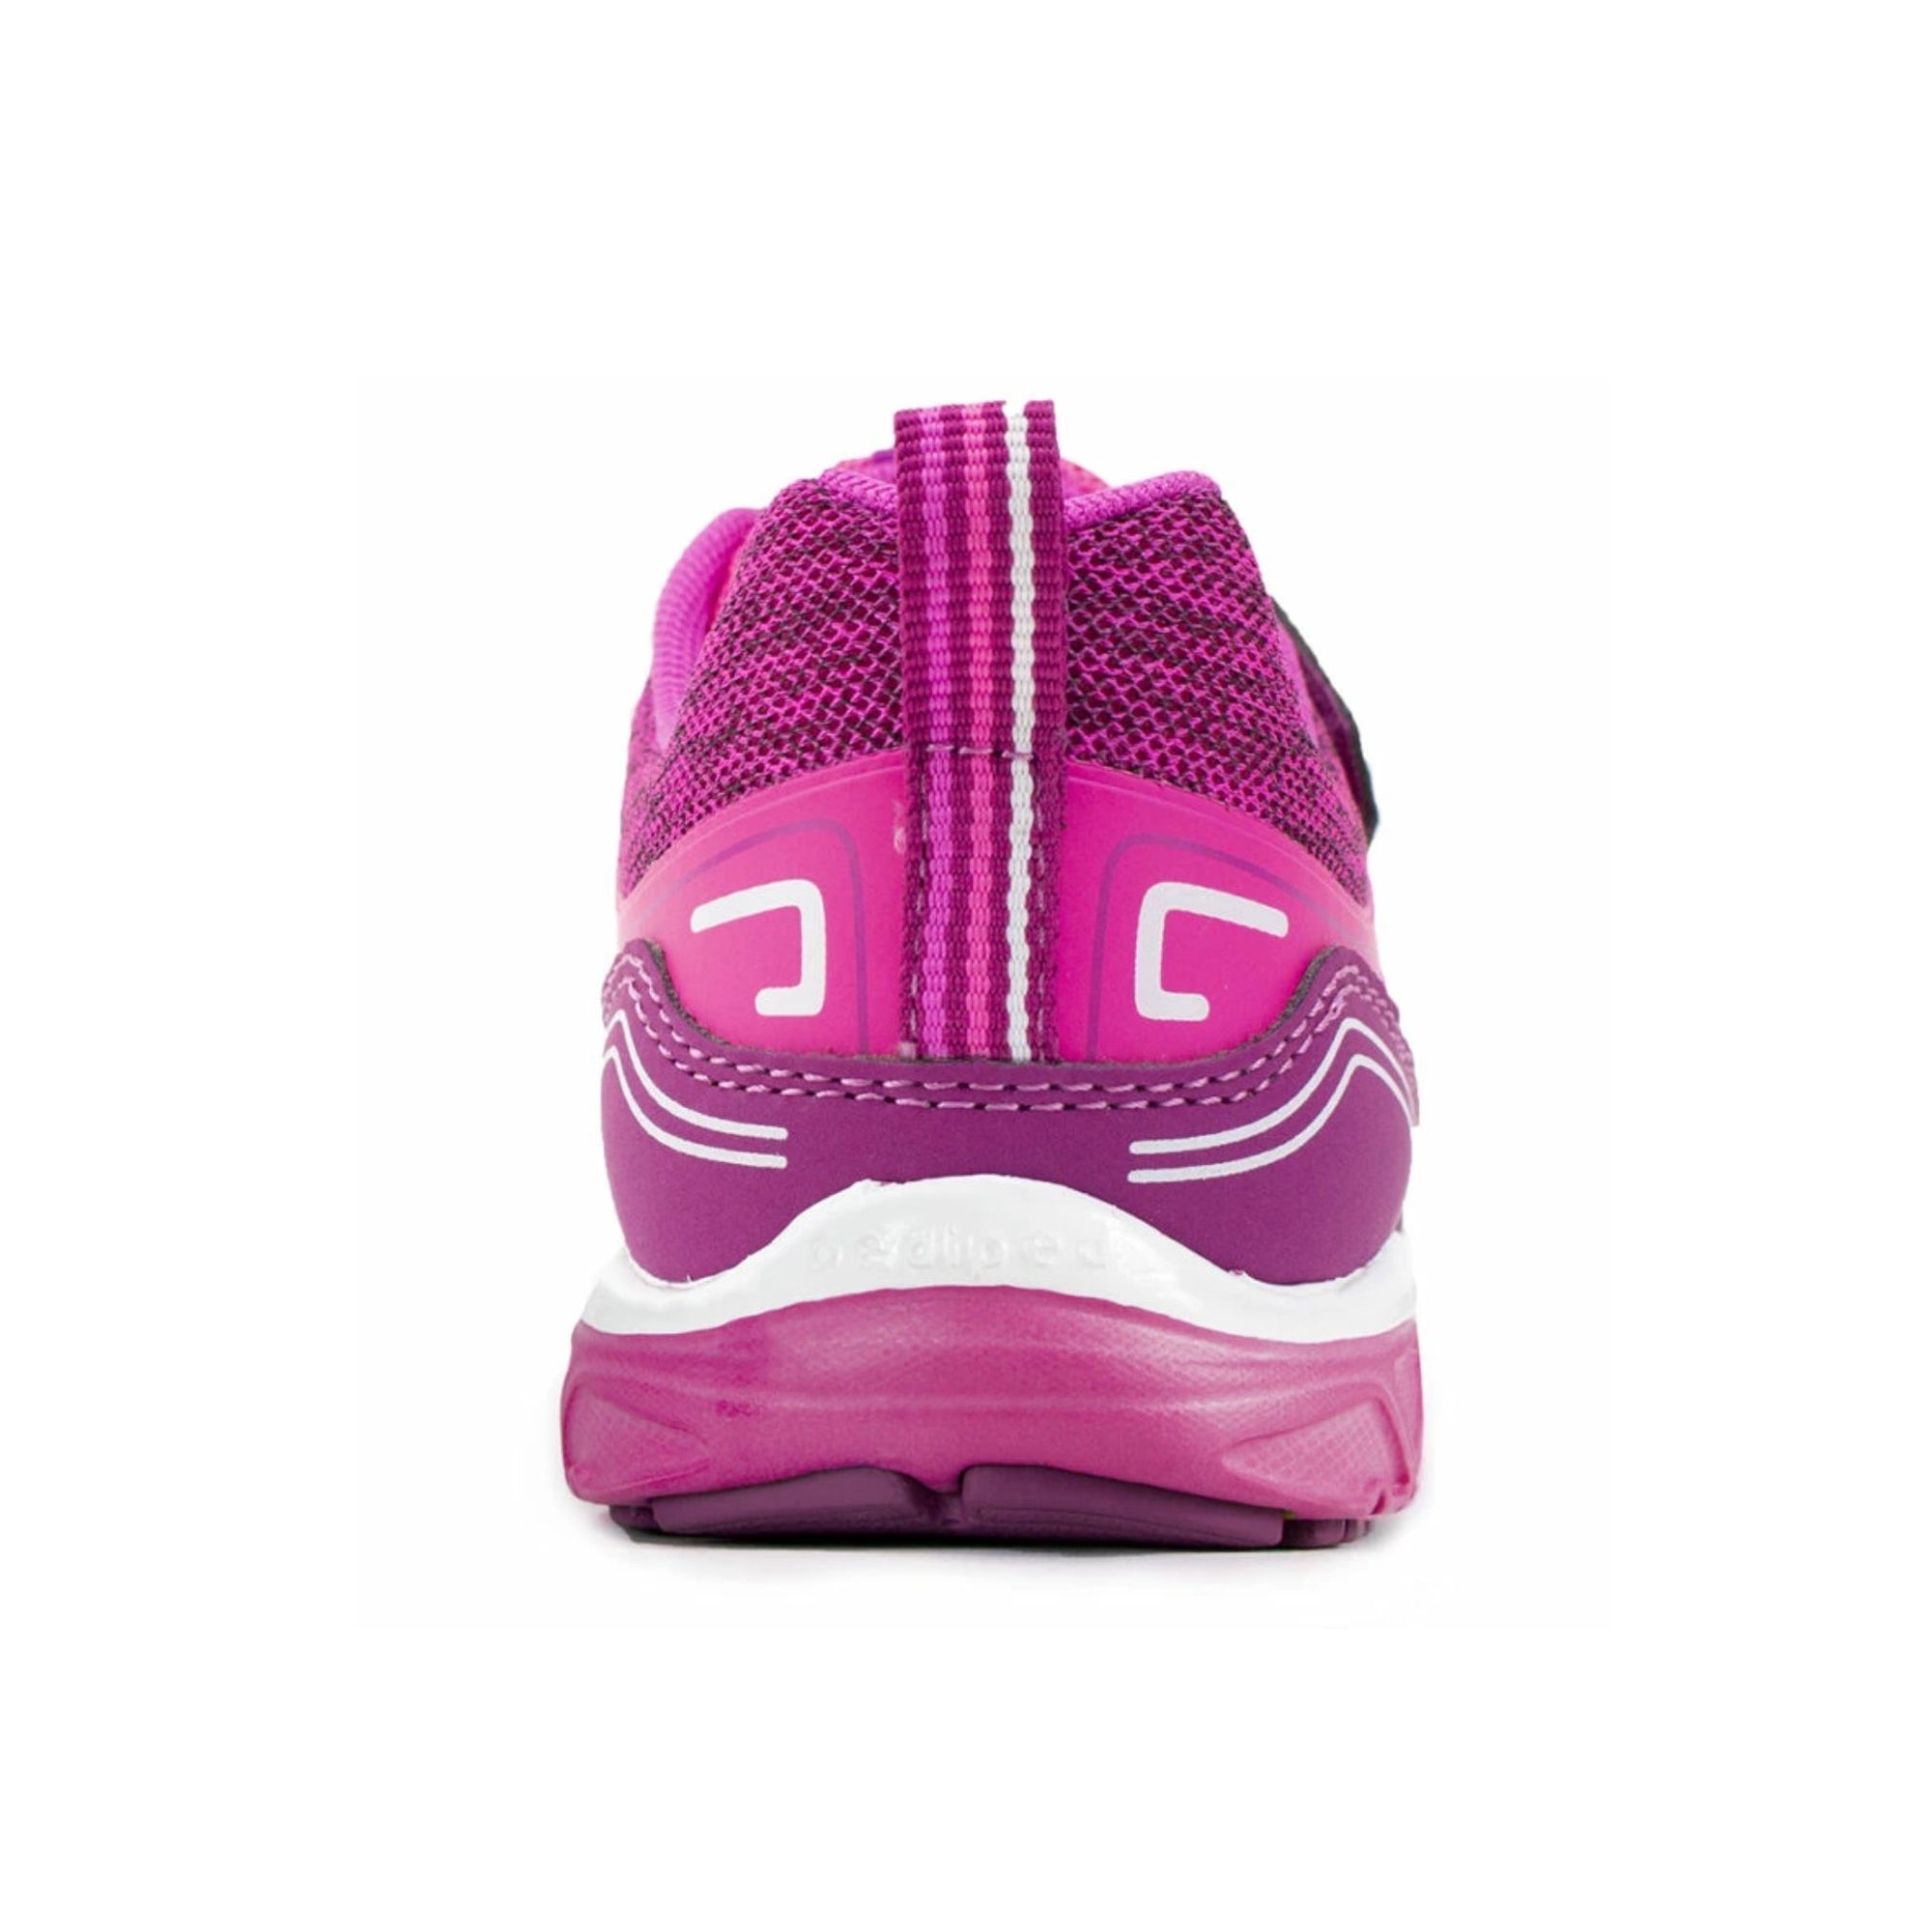 Pediped Flex Force Hot Pink Athletic Shoes